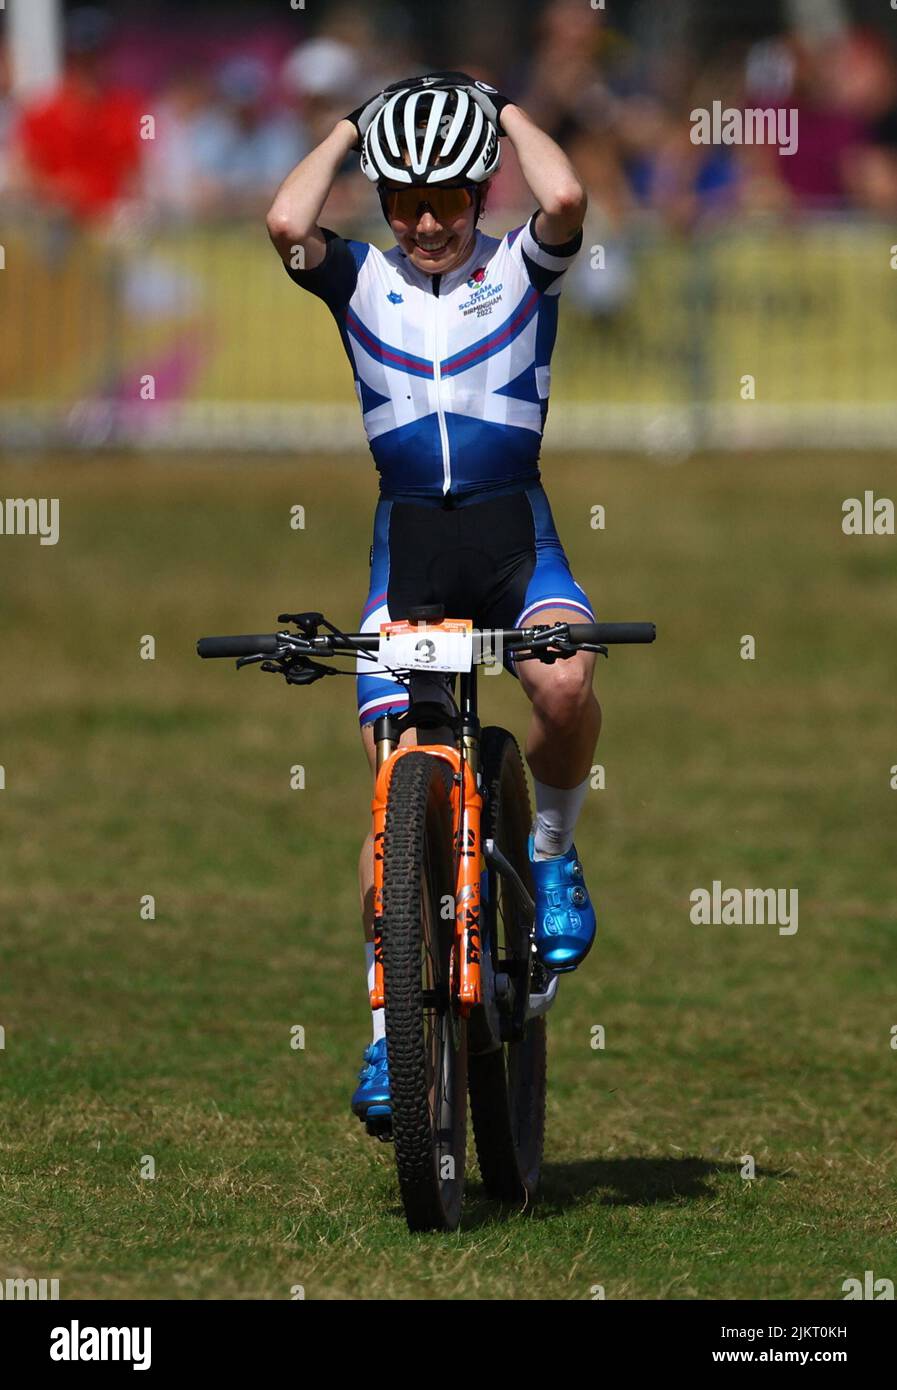 Commonwealth Games - Mountain Bike - Women's Cross-country - Final - Birches Valley, Rugeley, Birmingham, Britain - August 3, 2022 Scotland's Isla Short reacts after finishing in fourth place REUTERS/Hannah Mckay Stock Photo